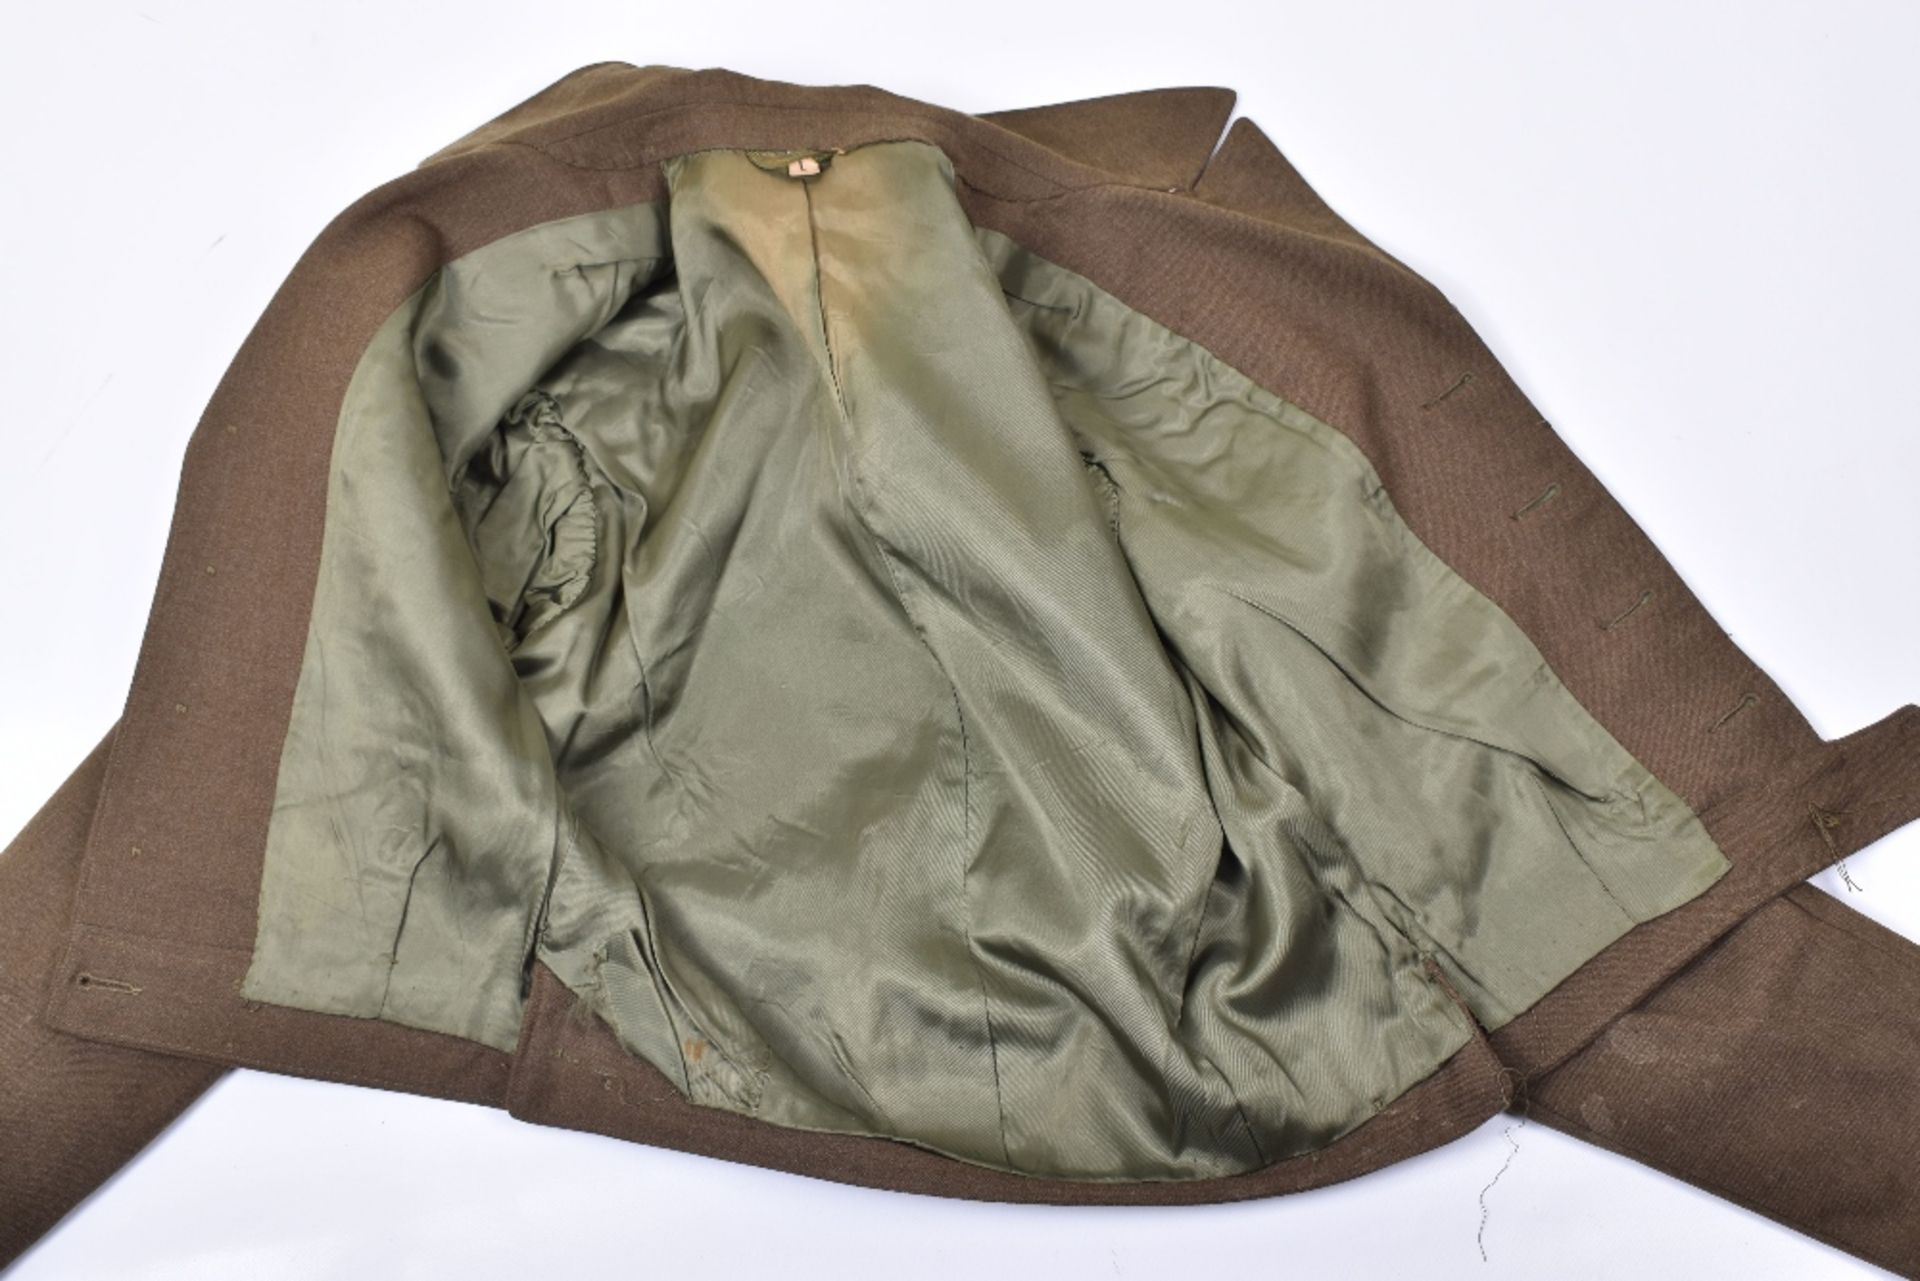 WW2 American Military Ike Jacket and Trousers - Image 8 of 12